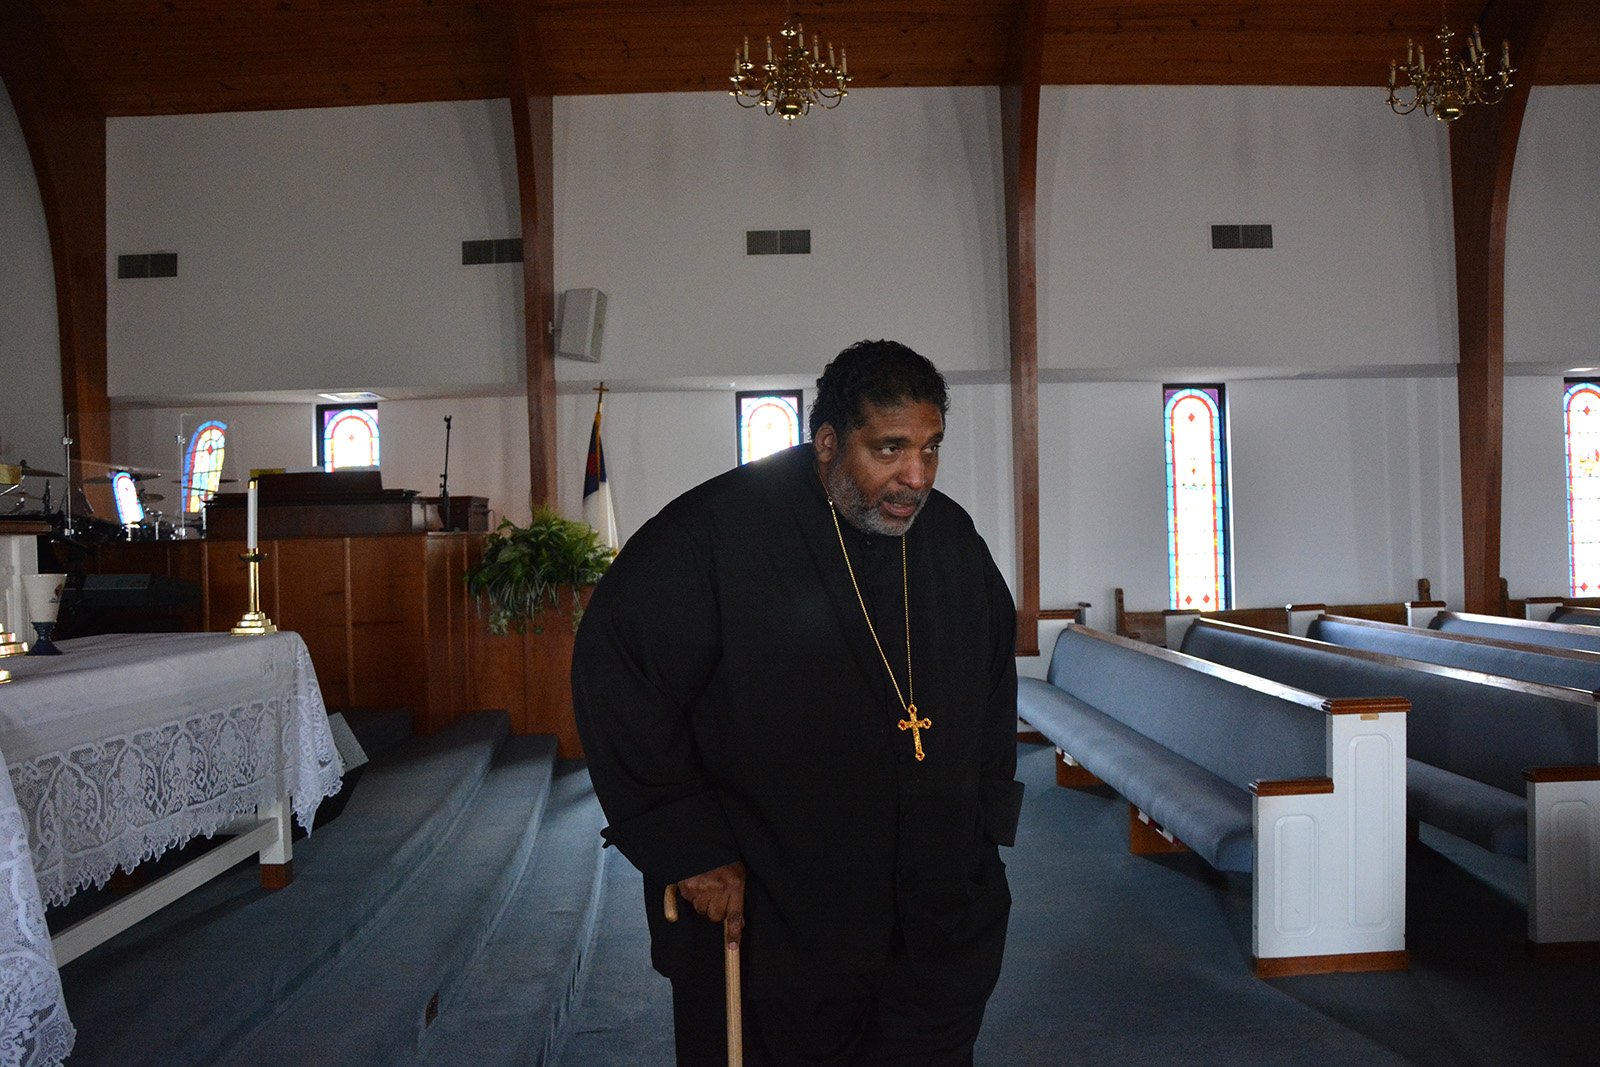 The Rev. William Barber II at Greenleaf Christian Church, his home congregation in Goldsboro, North Carolina, Saturday, March 26, 2022. RNS photo by Jack Jenkins